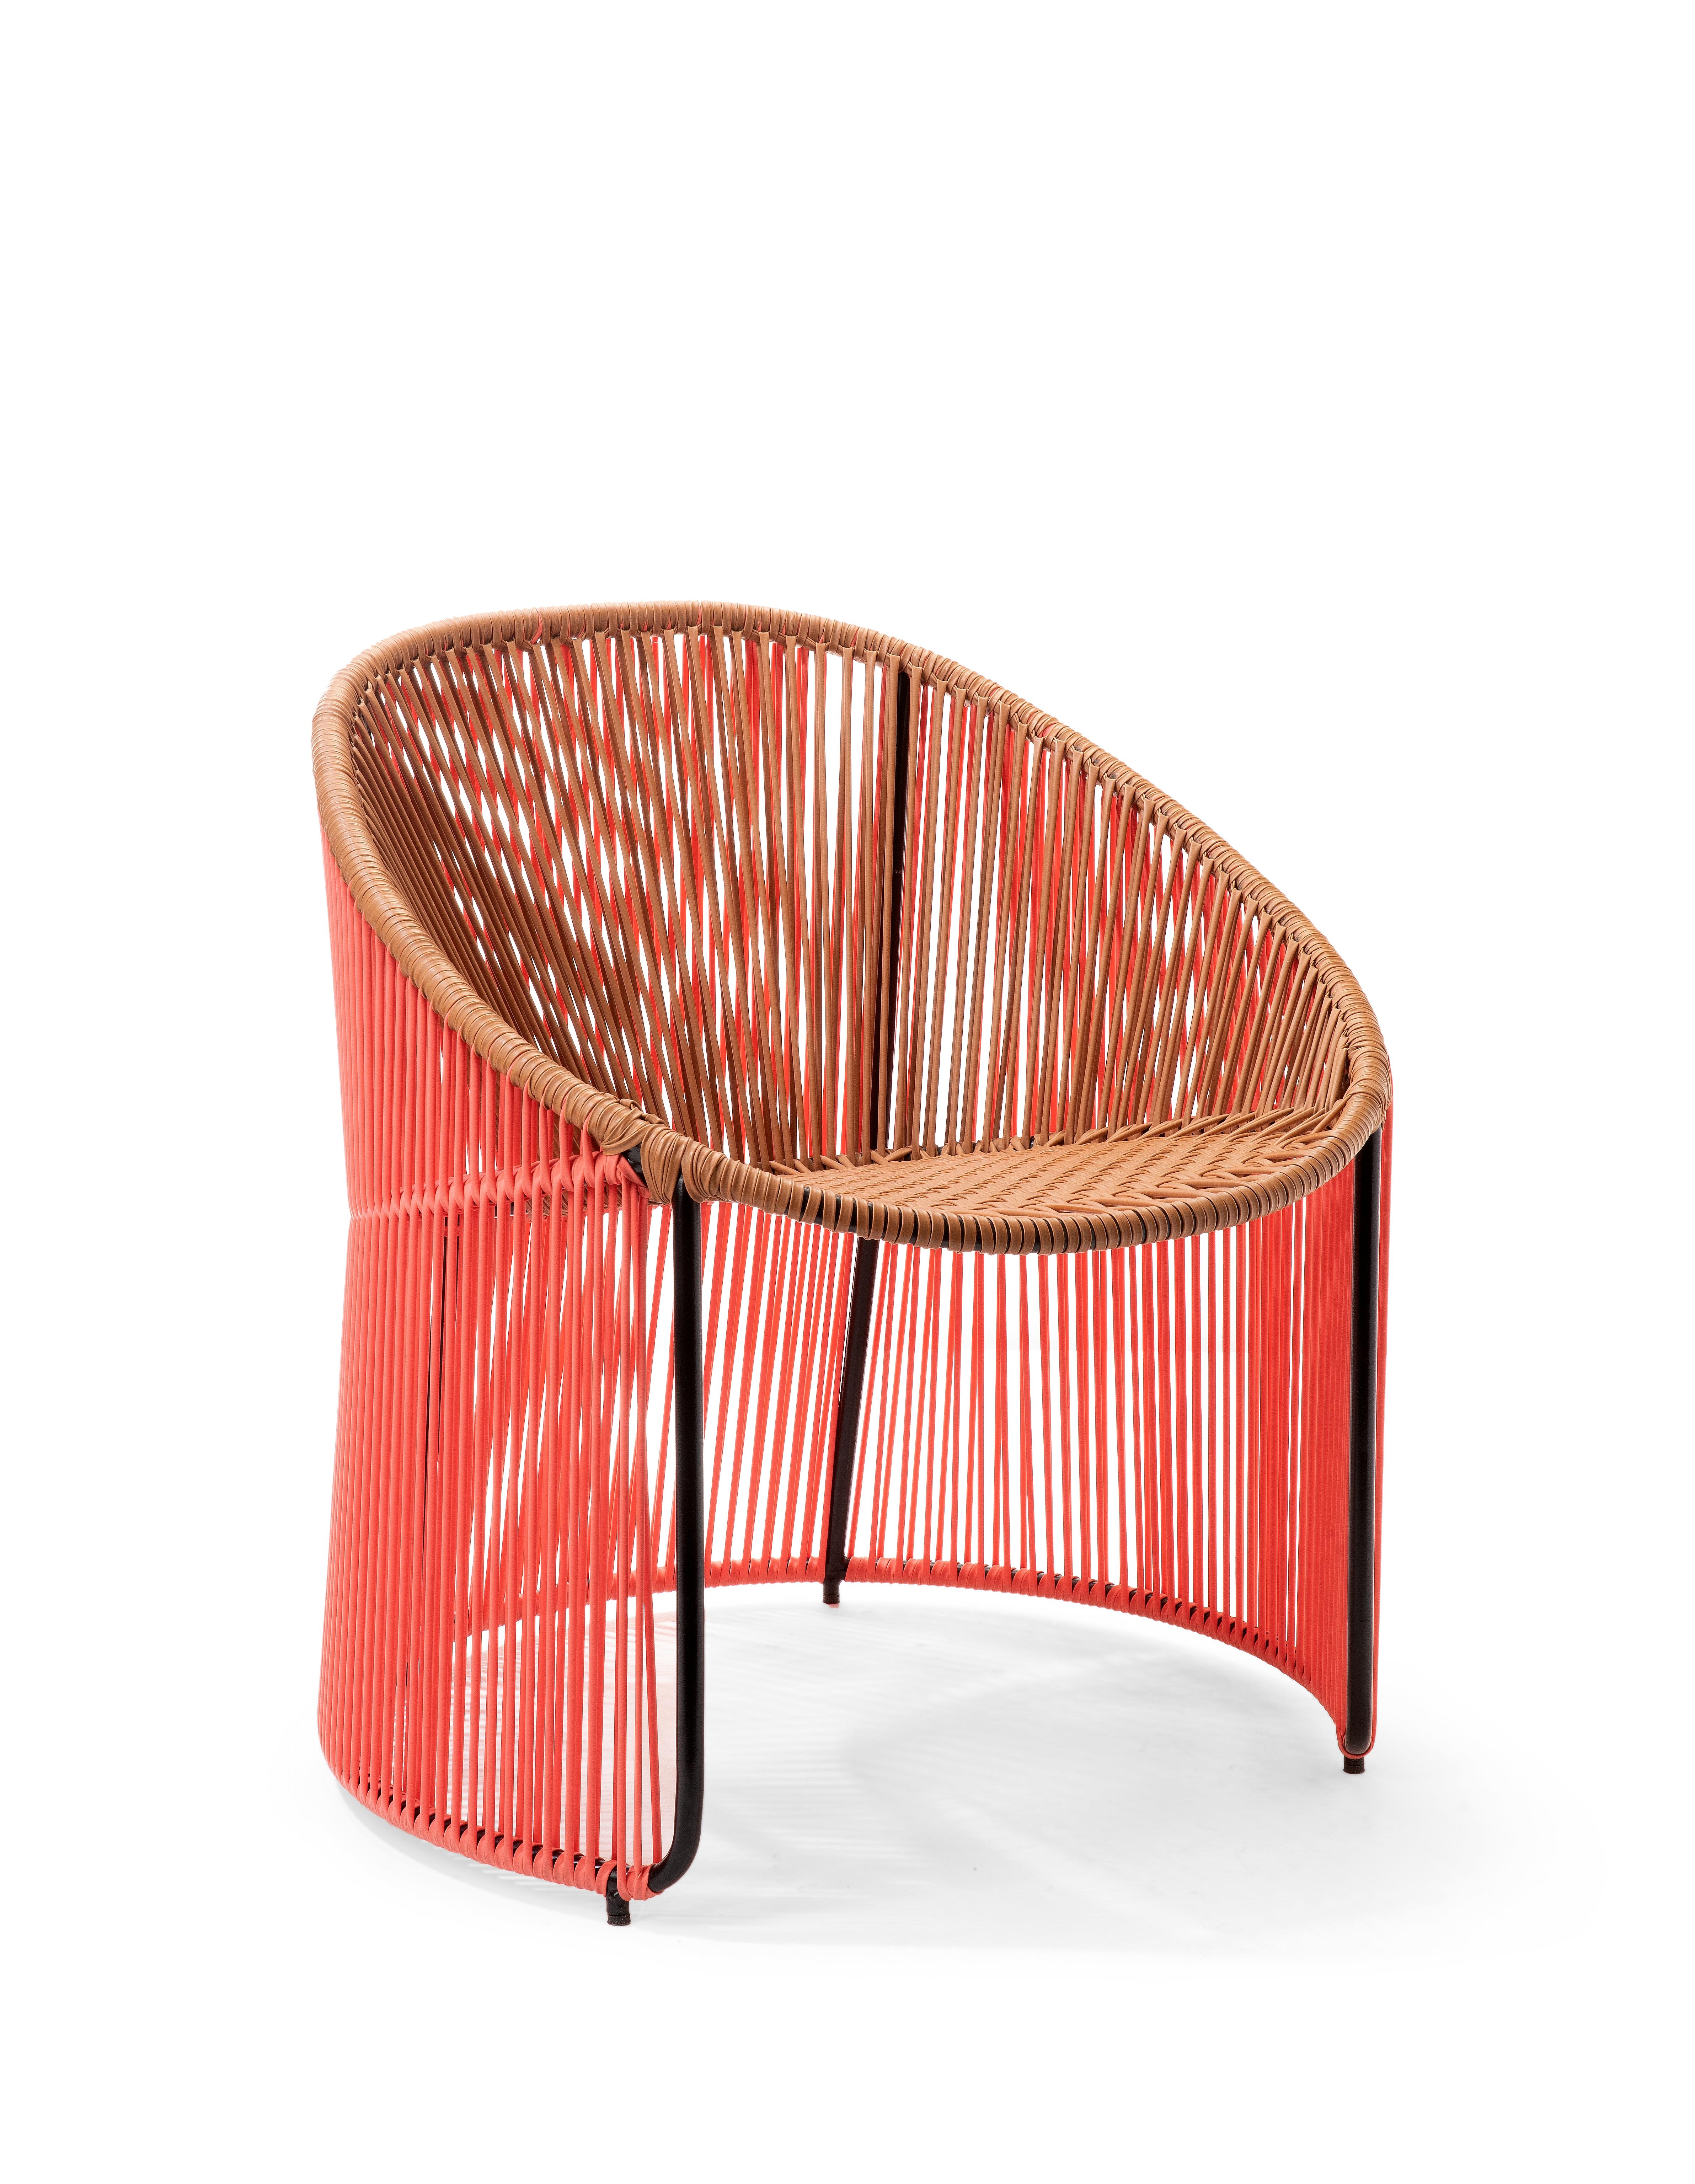 Set of 2 Coral Cartagenas lounge chair by Sebastian Herkner
Materials: PVC strings. Galvanized and powder-coated tubular steel frame
Technique: made from recycled plastic. Weaved by local craftspeople in Colombia. 
Dimensions: W 64 x D 70 x H 74